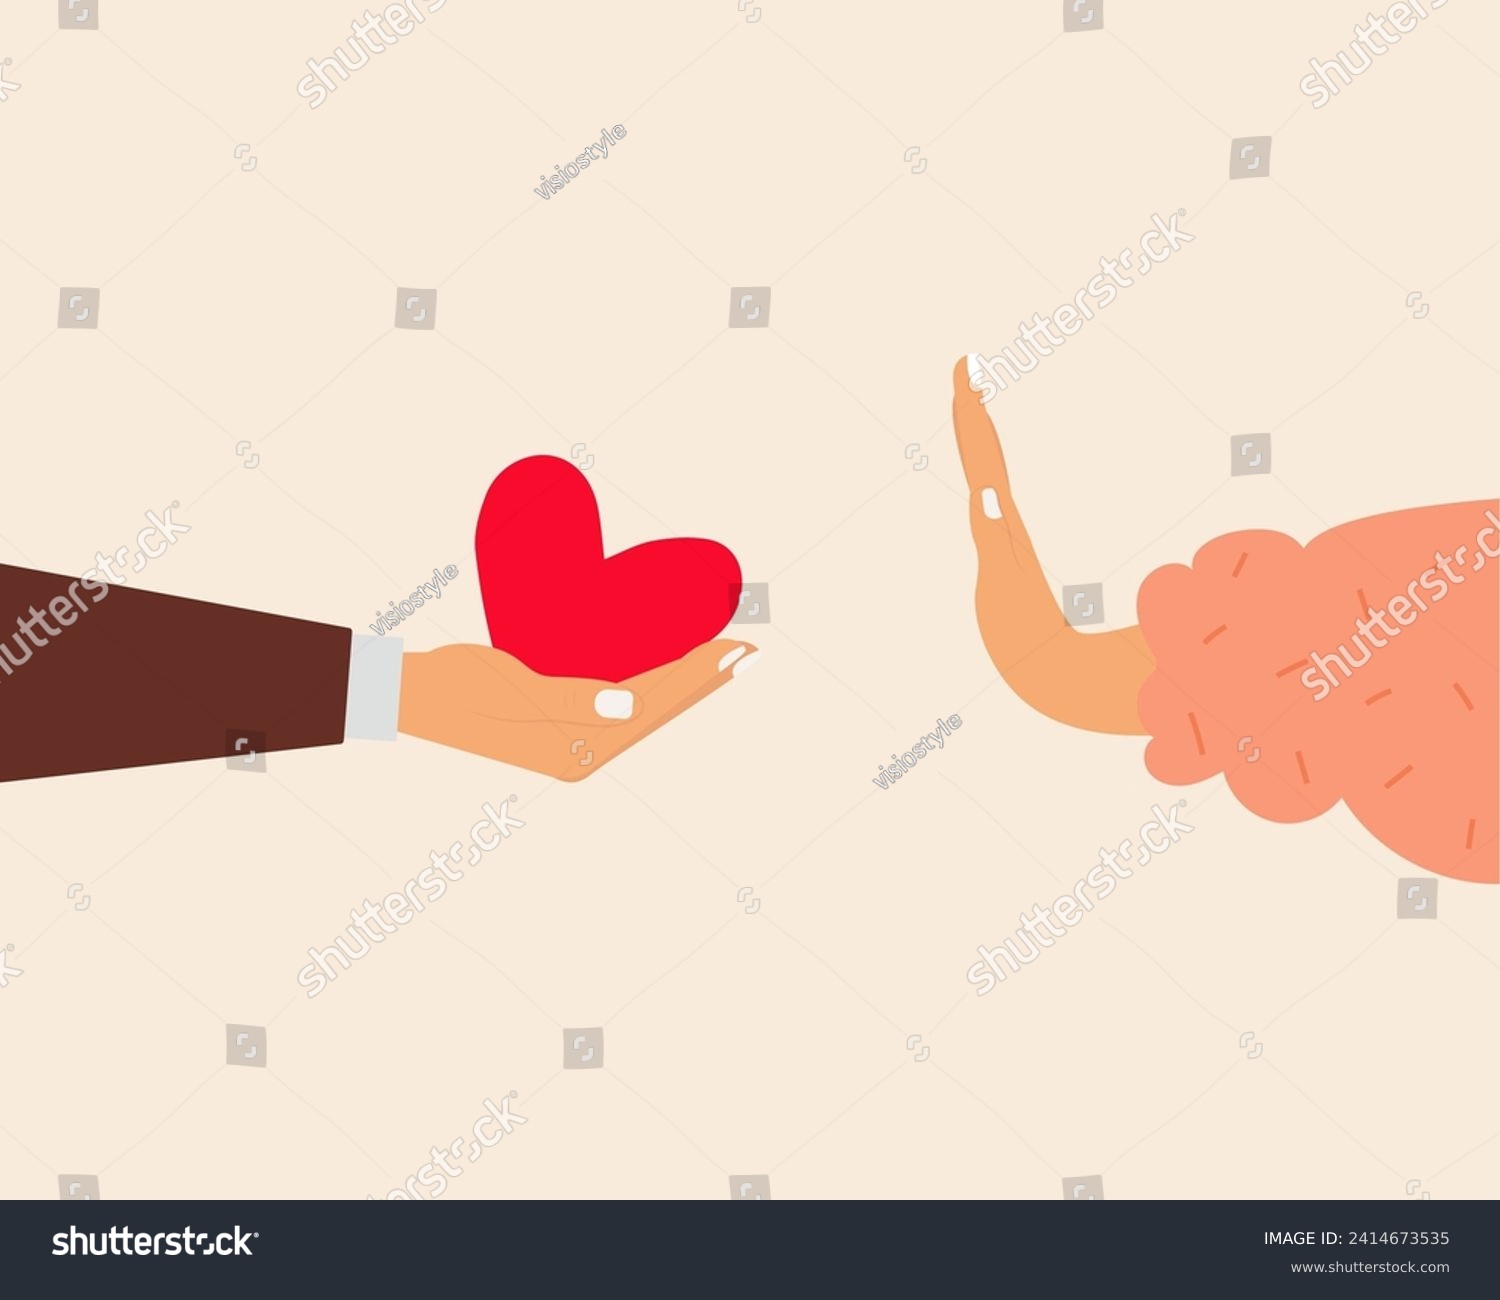 SVG of 
Person not allowing to show care for him. Human hand refuses love and help hand. Character avoidant and dismissive of support from people. Mental health vector illustration
 svg